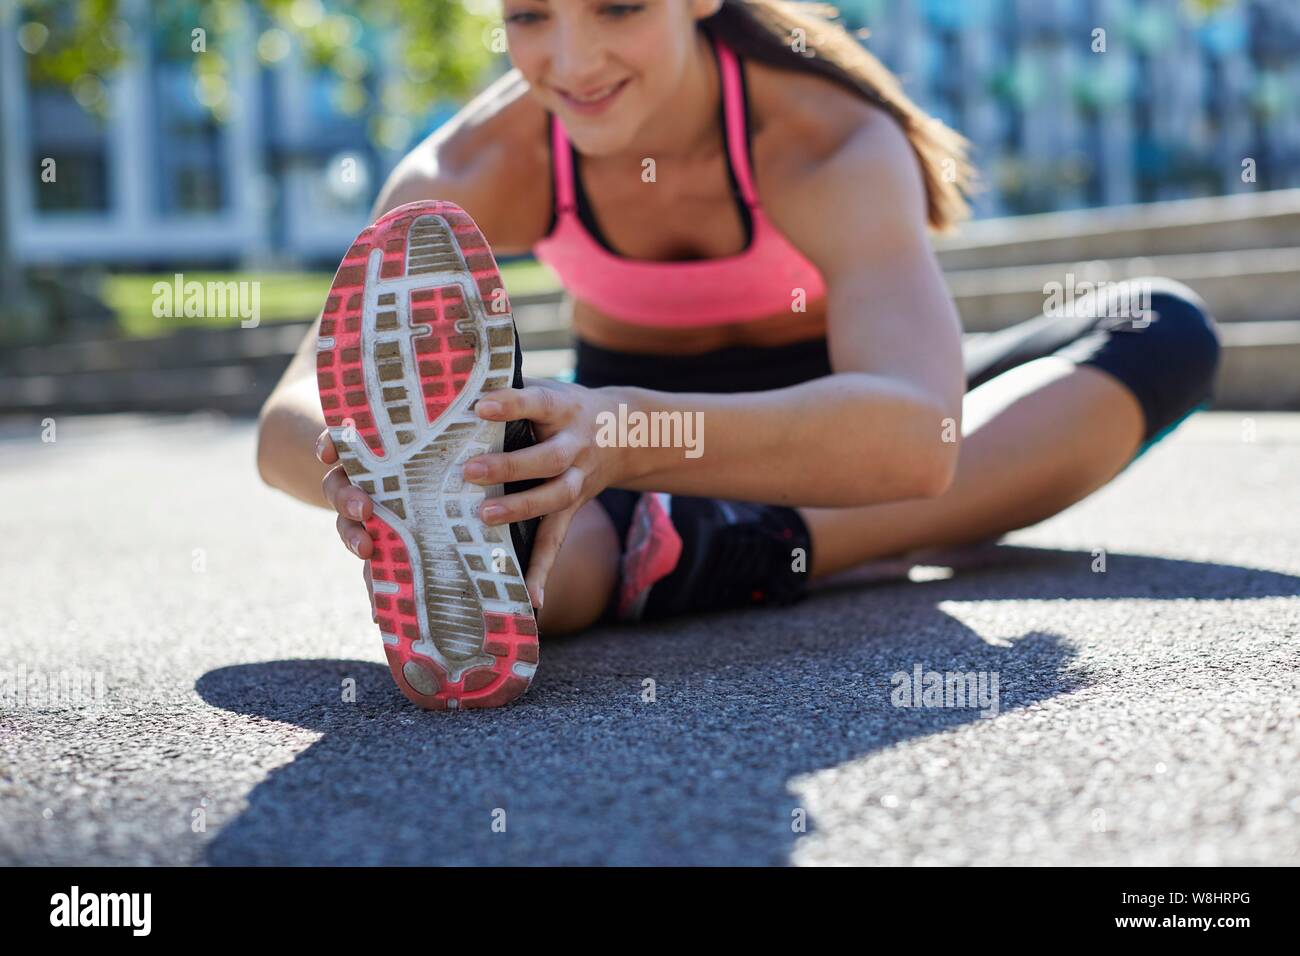 Young woman stretching her leg. Stock Photo